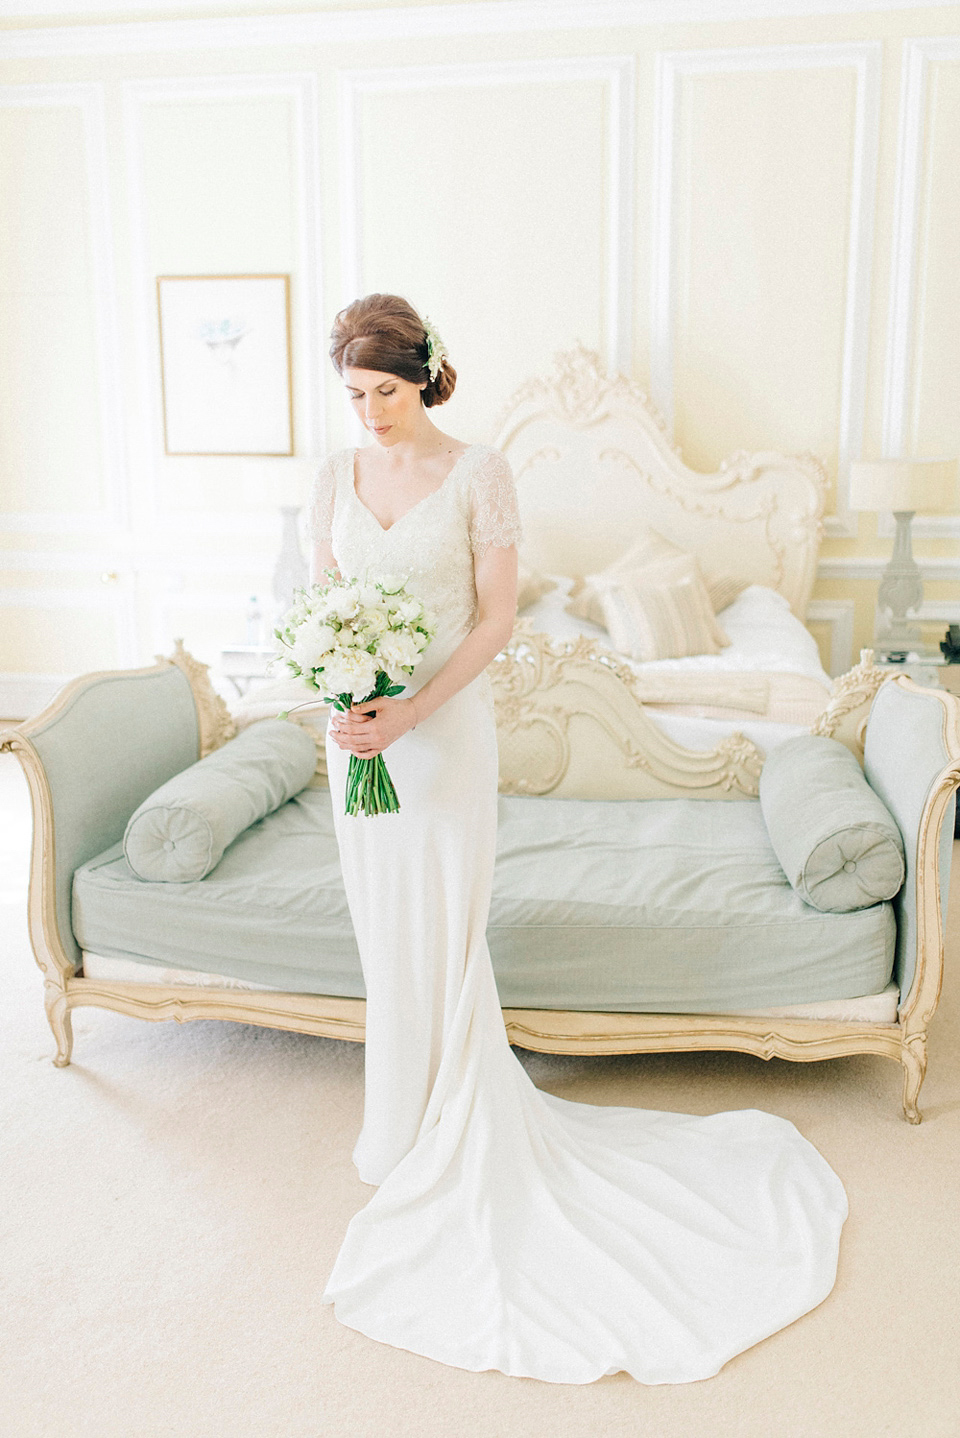 Bride Laura wears an Anoushka G gown for her late Summer wedding at Eshott Hall in Northumberland. Photography by Sarah Jane Ethan.